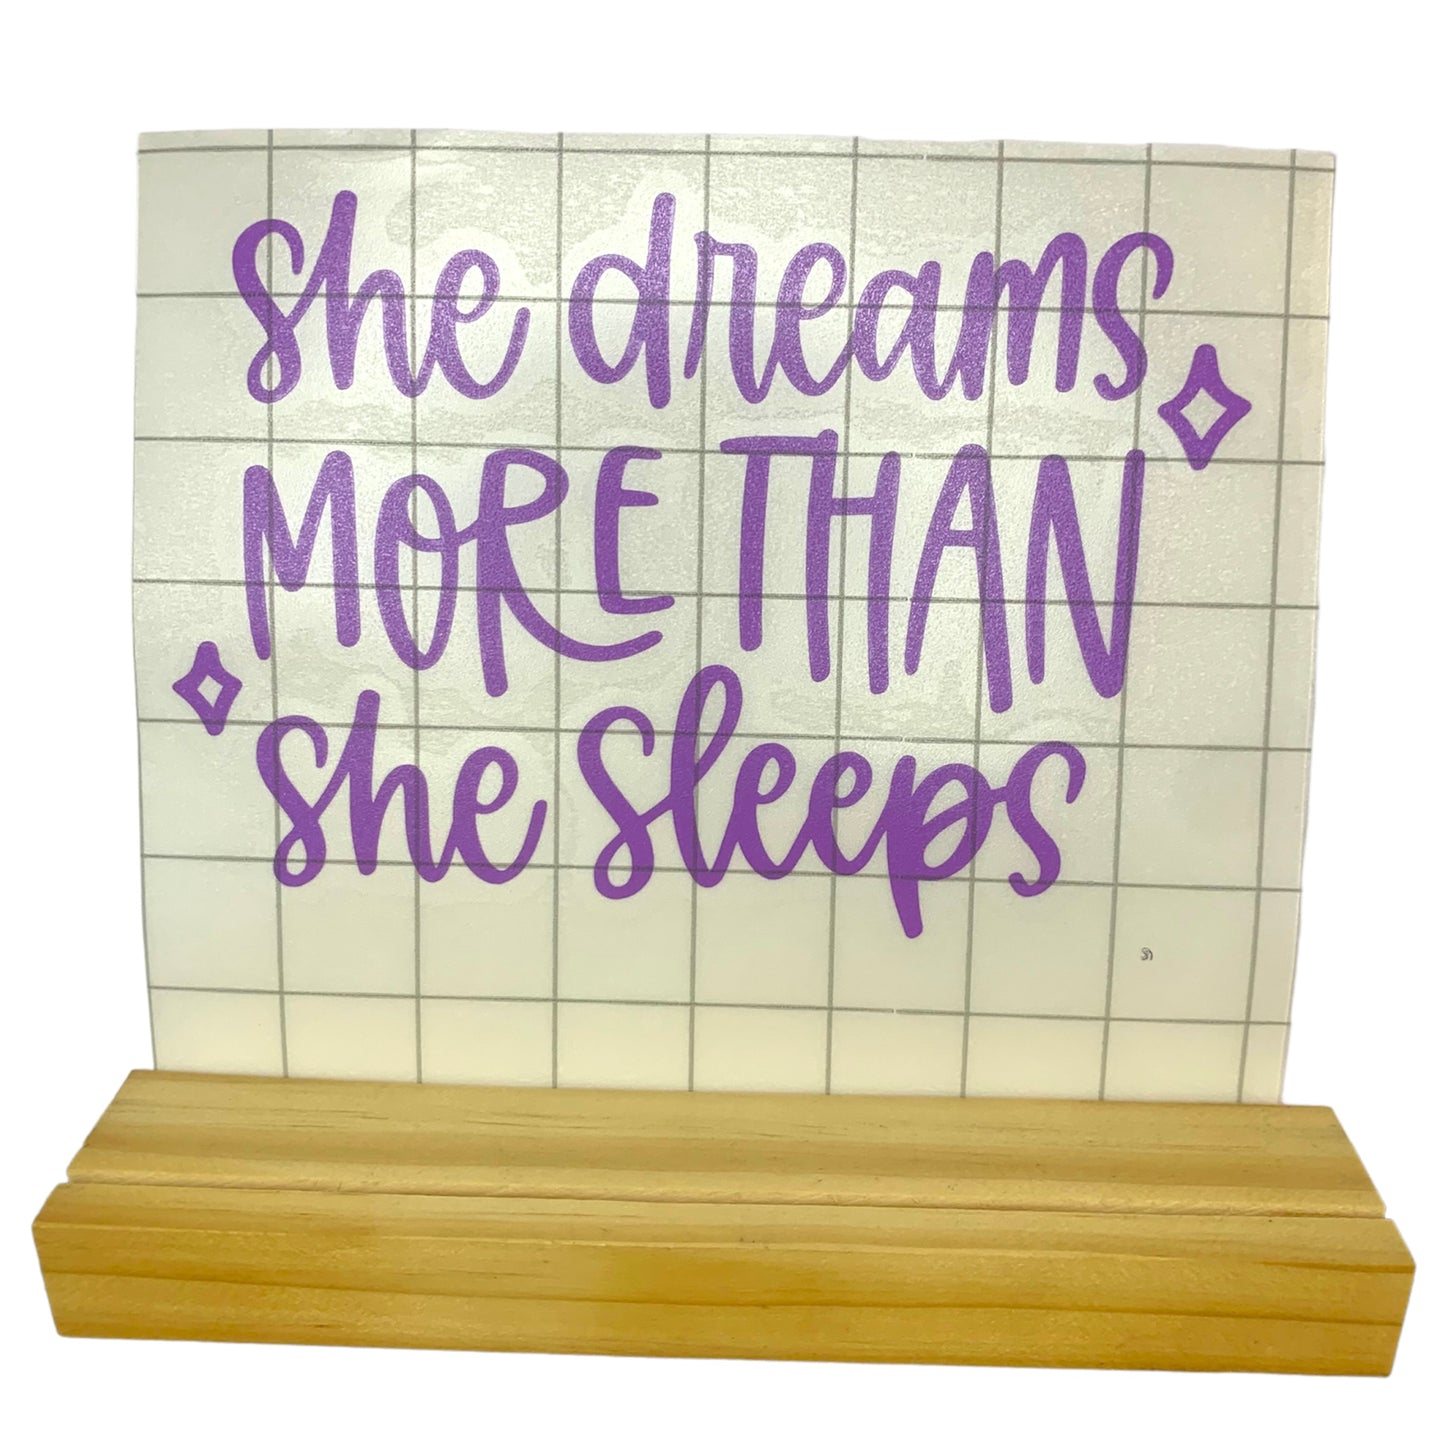 She Dreams decal